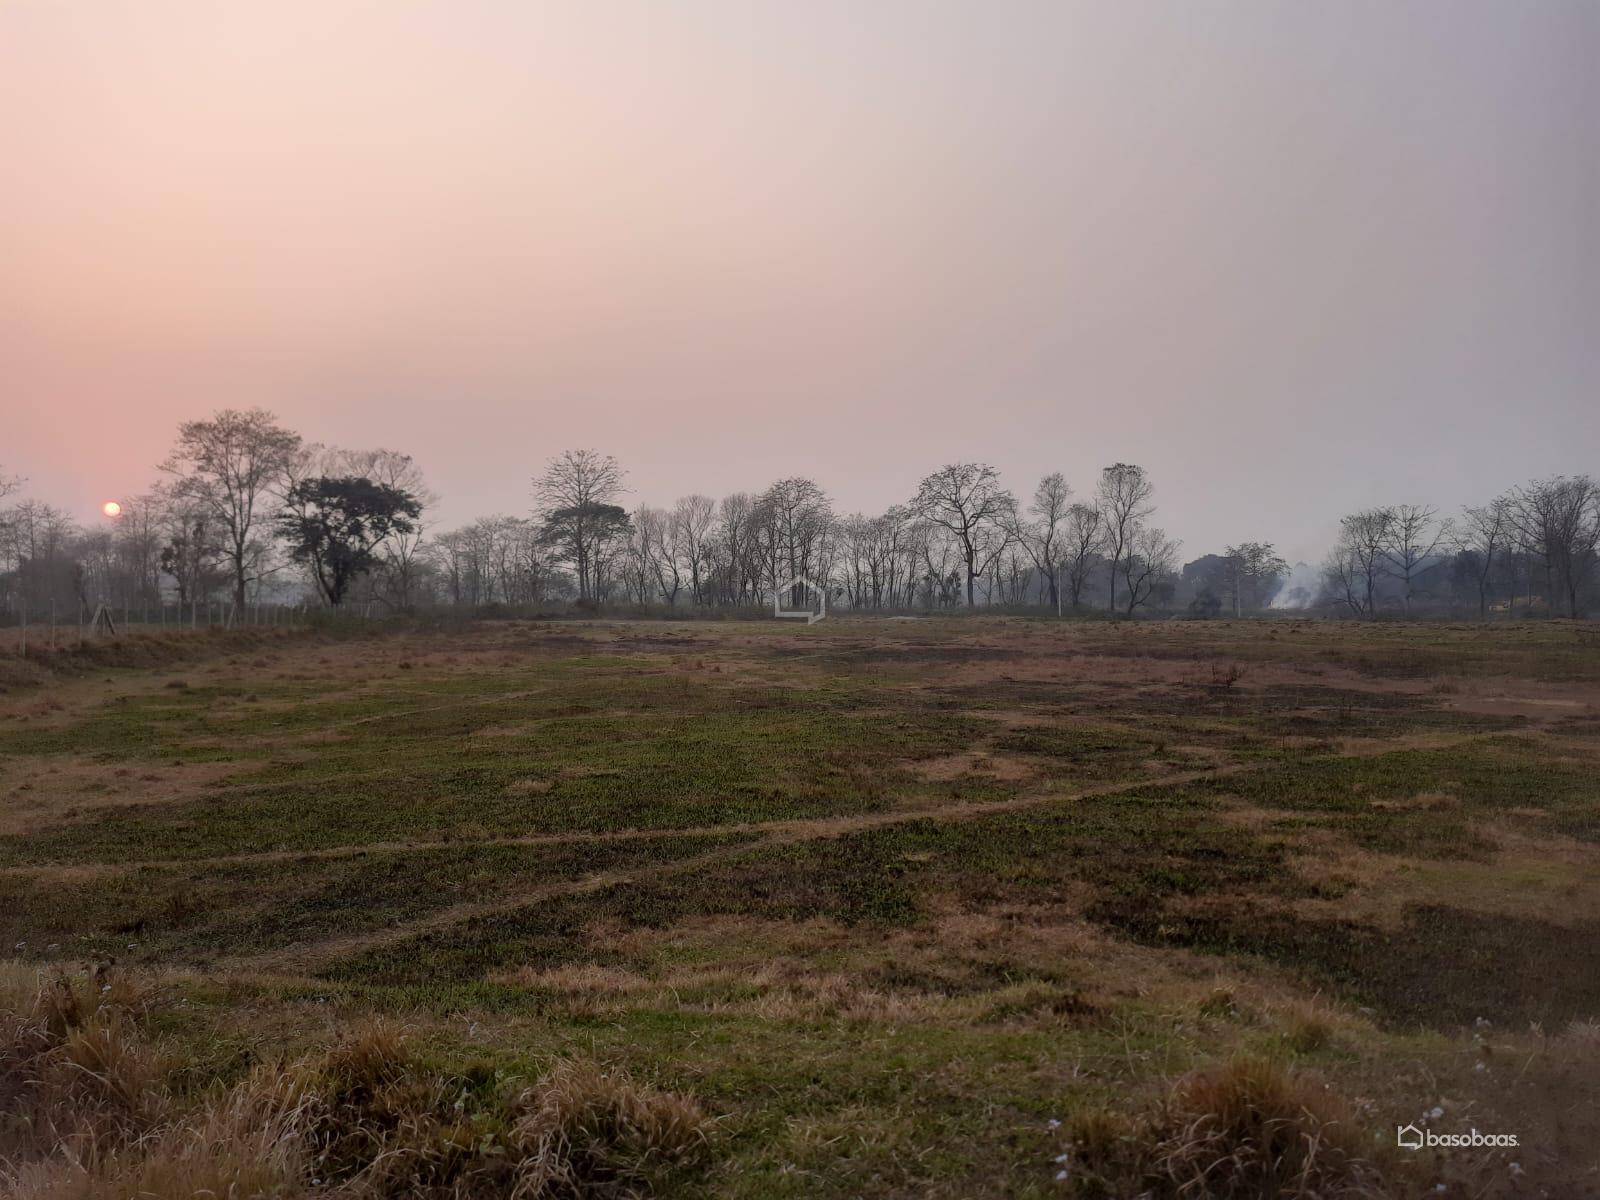 Commercial or Agriculture Land : Land for Sale in Bharatpur, Chitwan Image 4